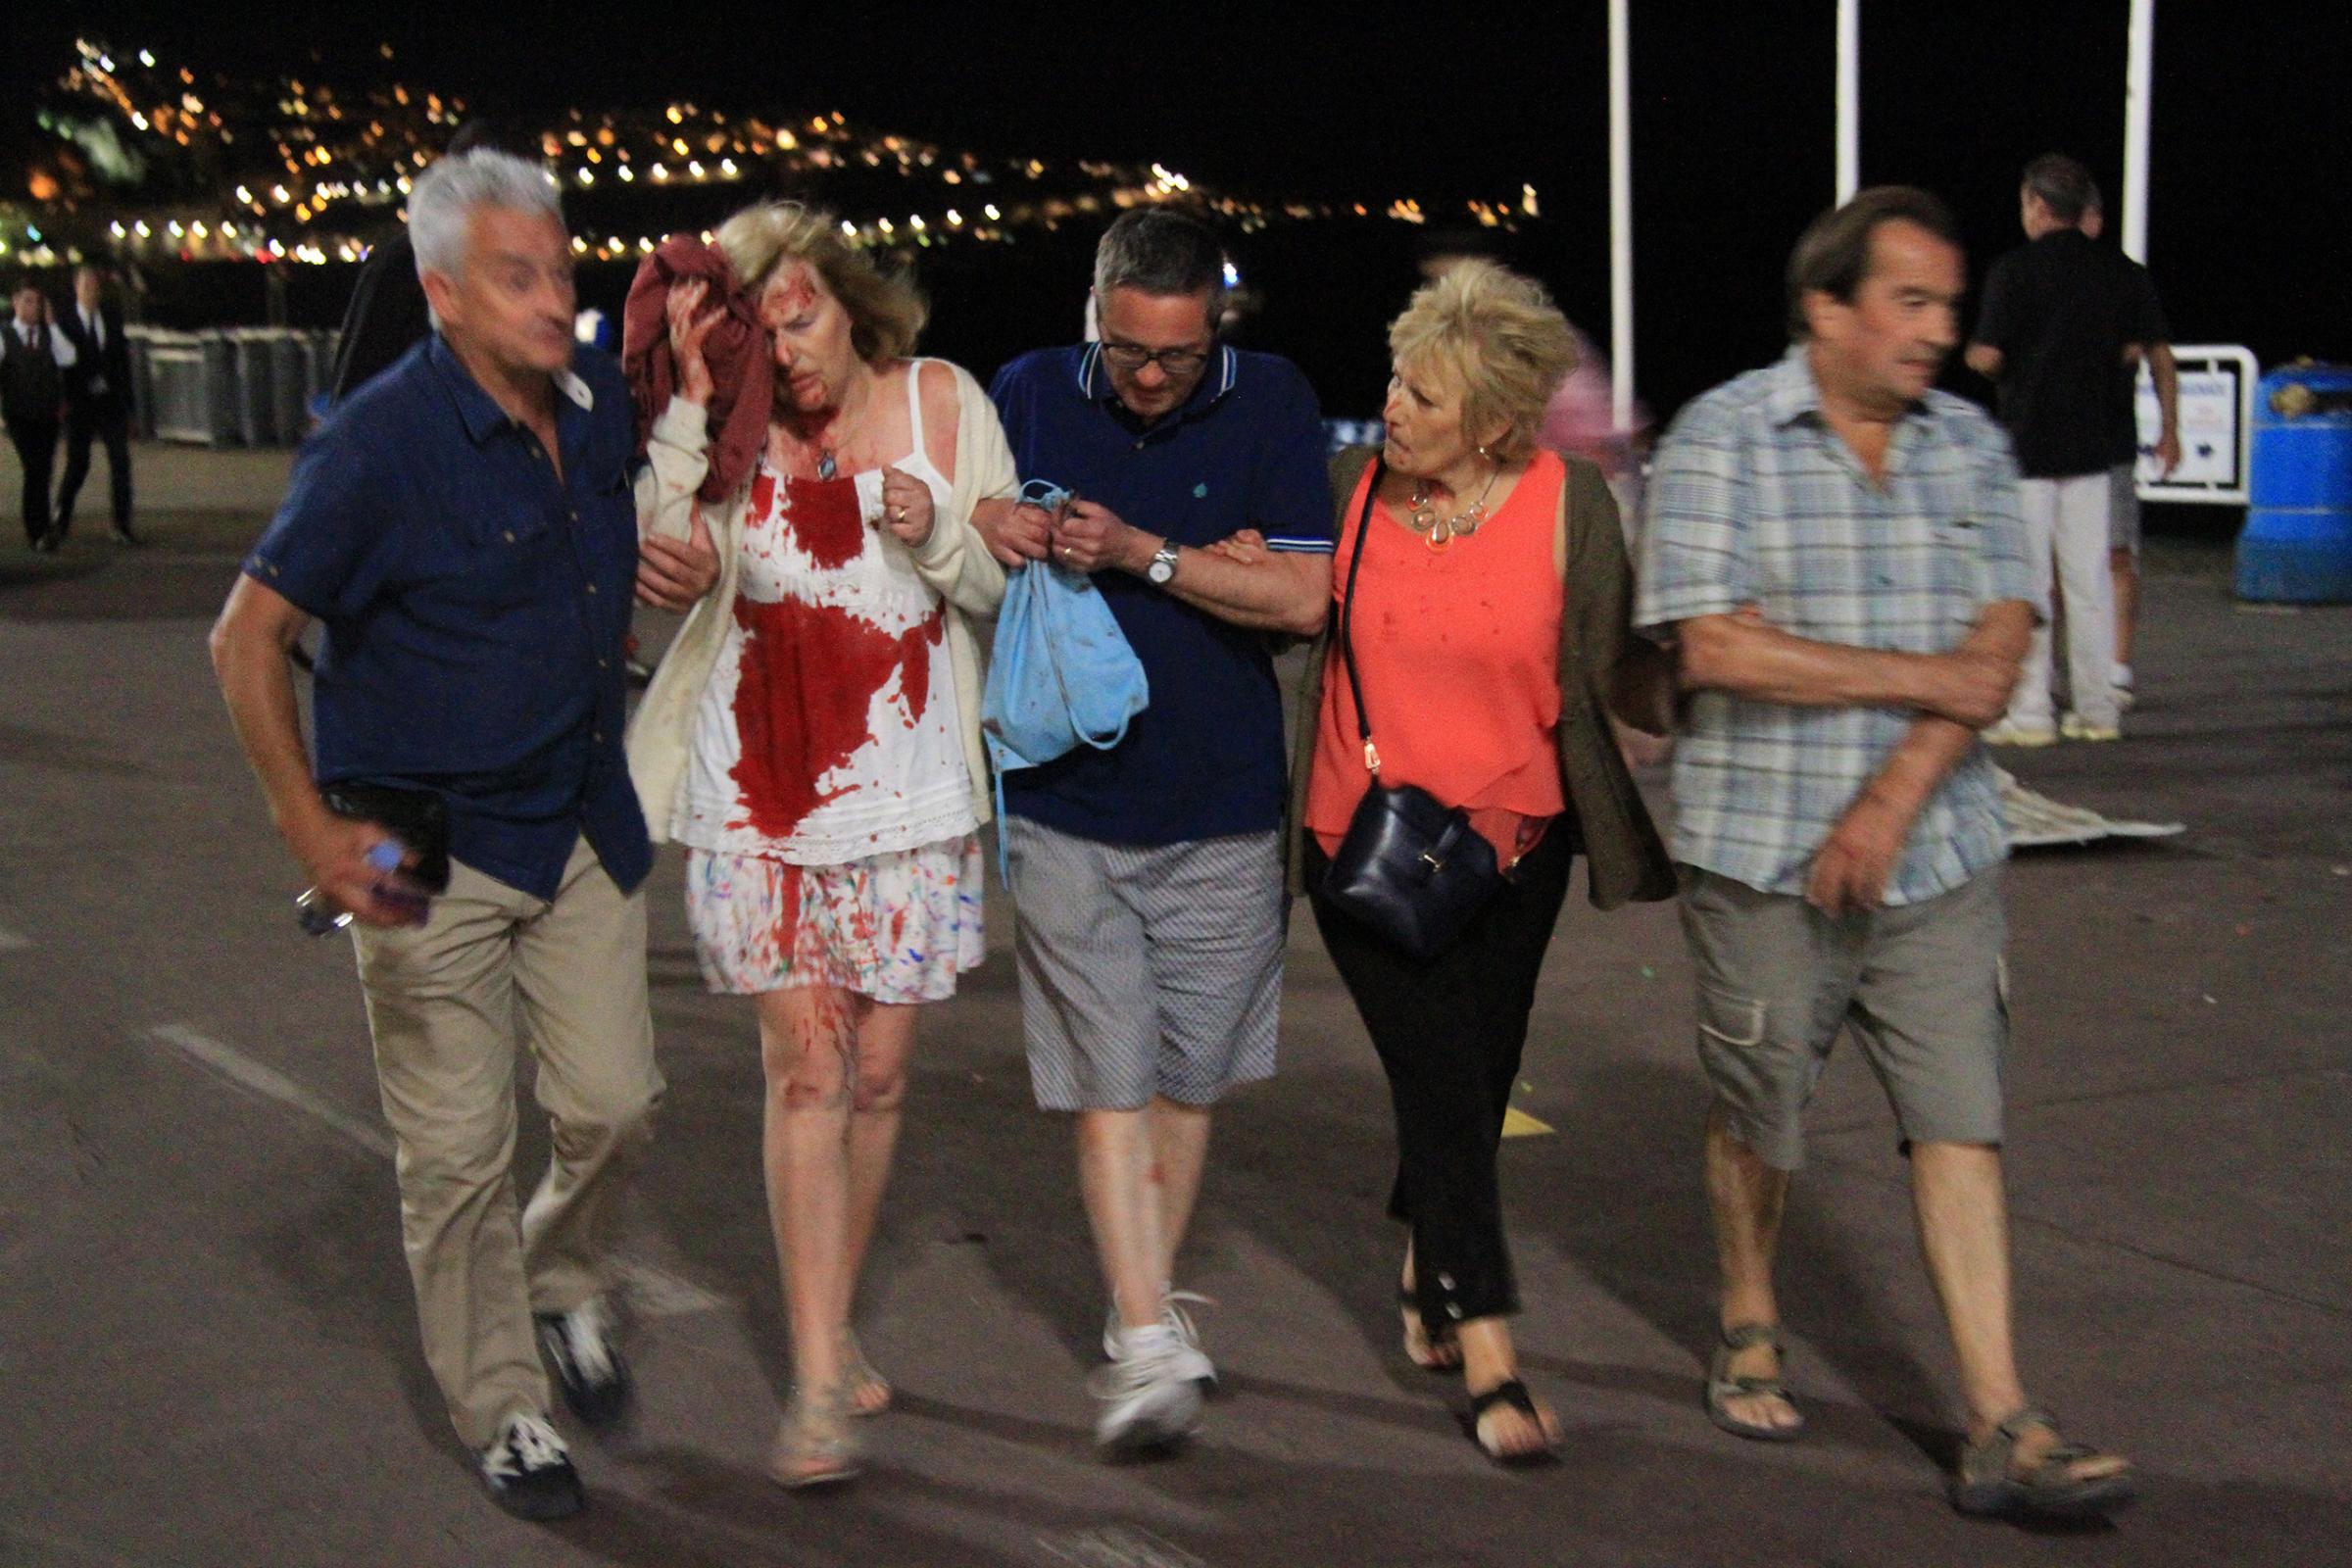 A woman whose shirt is covered in blood is helped after authorities said a truck slammed into a crowd in Nice, France, on July 14, 2016. French officials said more than 70 people were killed.